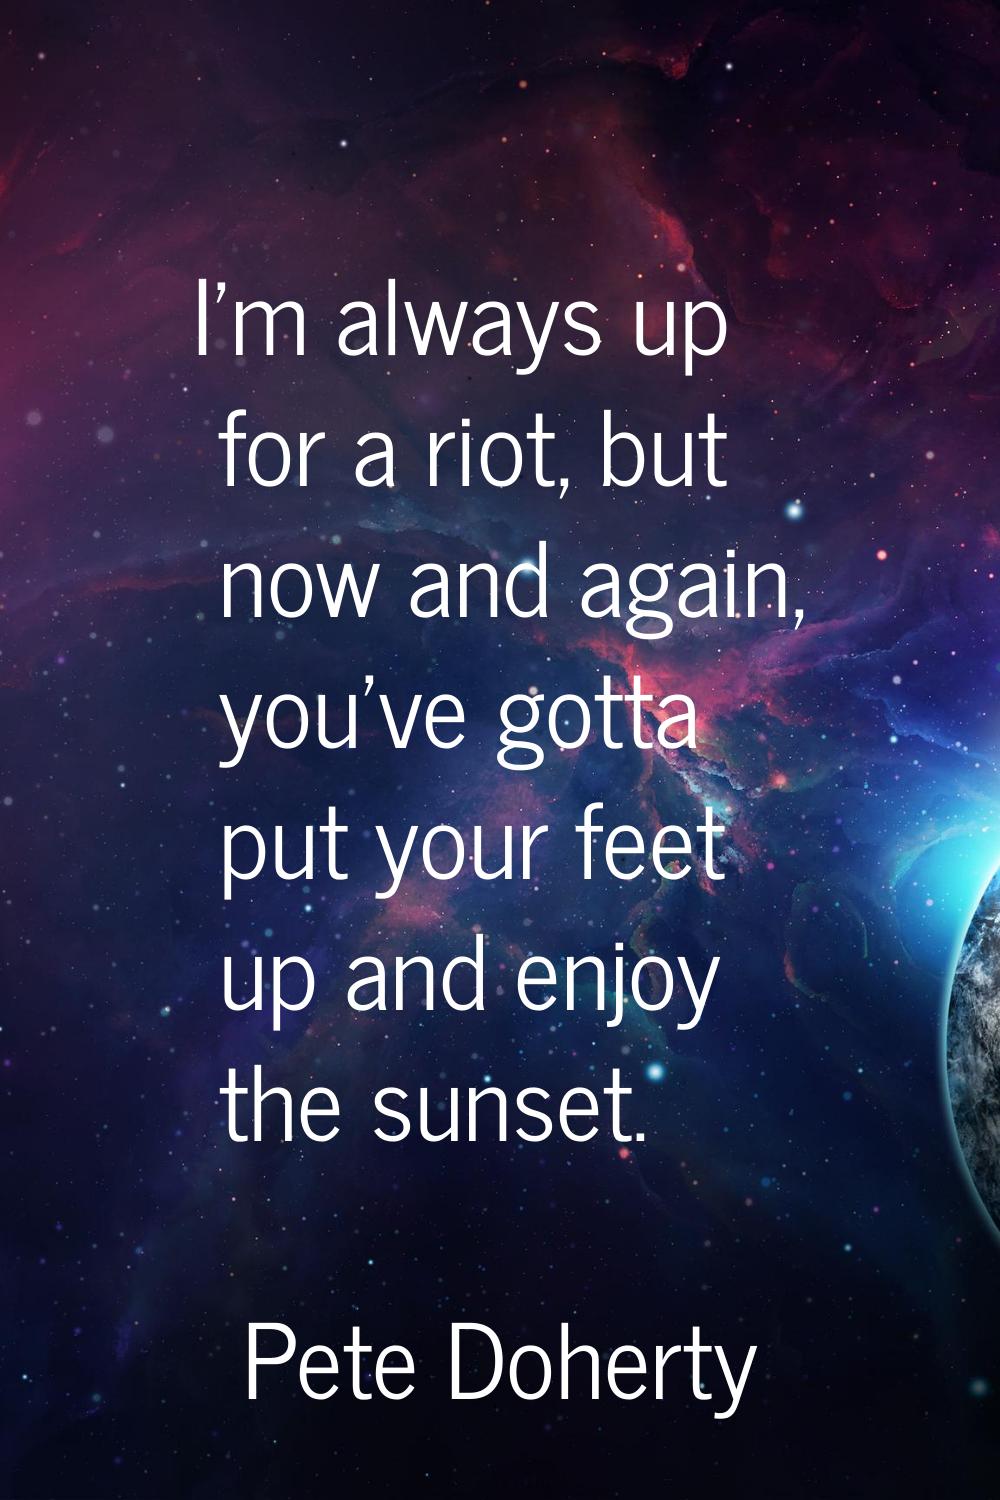 I'm always up for a riot, but now and again, you've gotta put your feet up and enjoy the sunset.